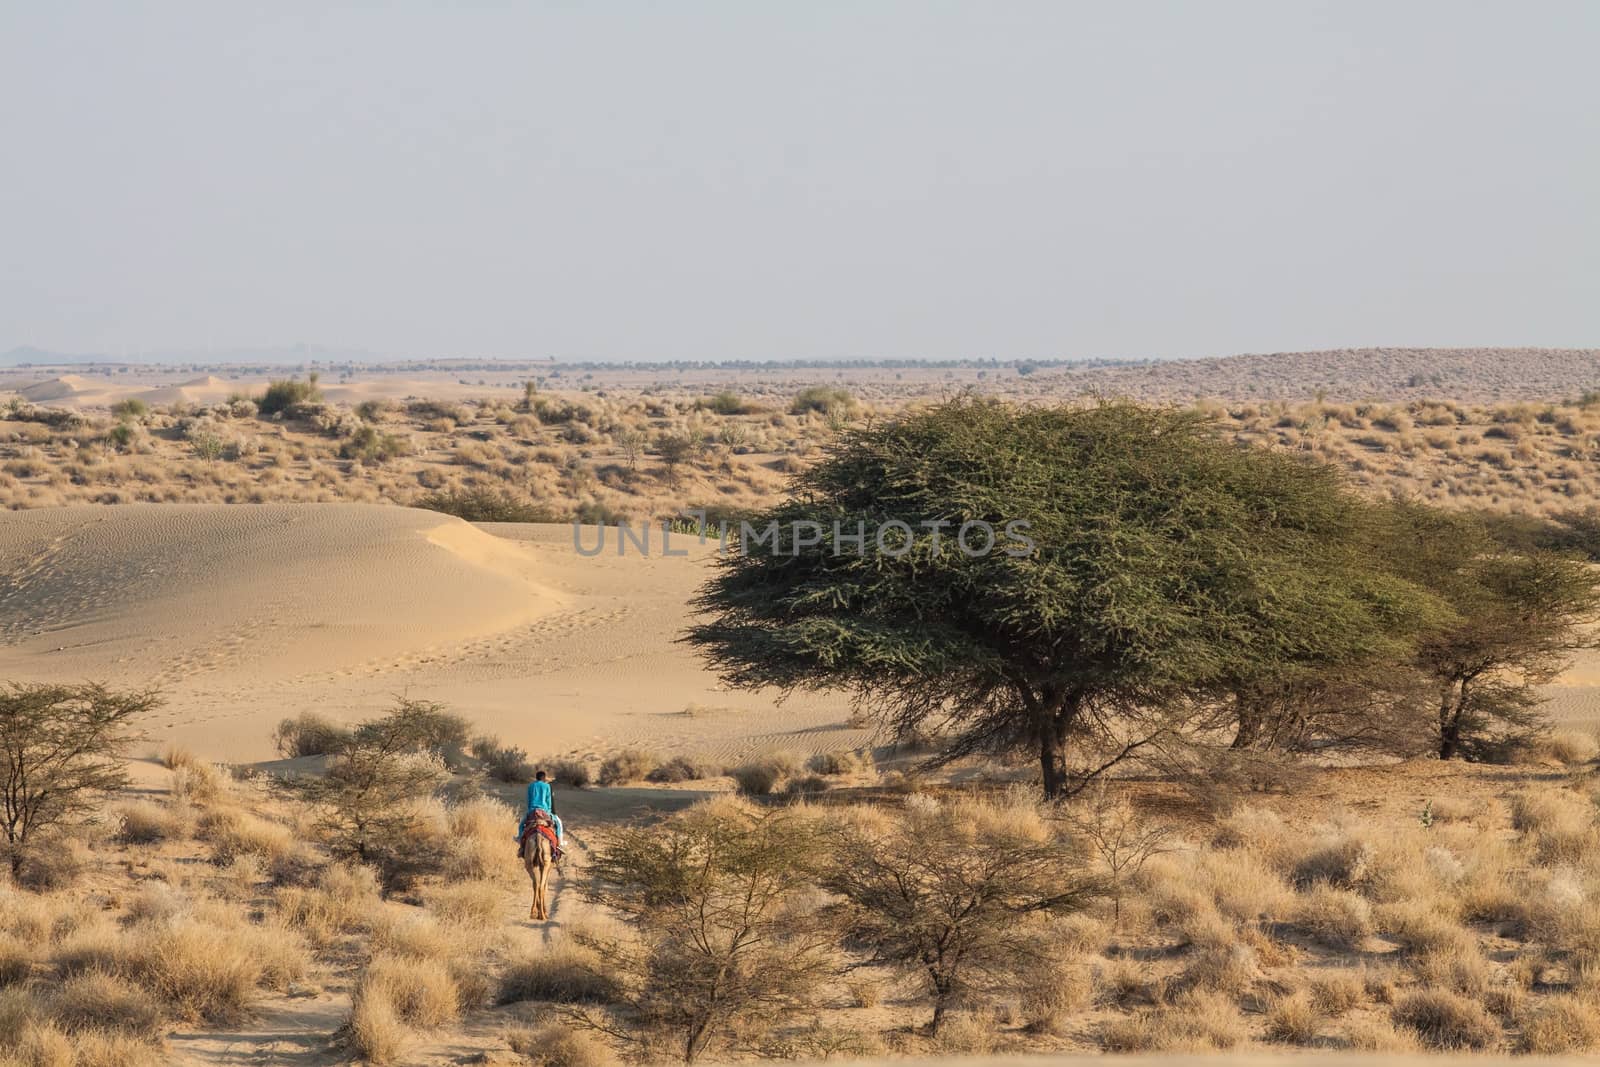 A single camel with rider seen going into the desert. panoramic view of desert with sand dunes dry shrub and some green trees against a clear sky